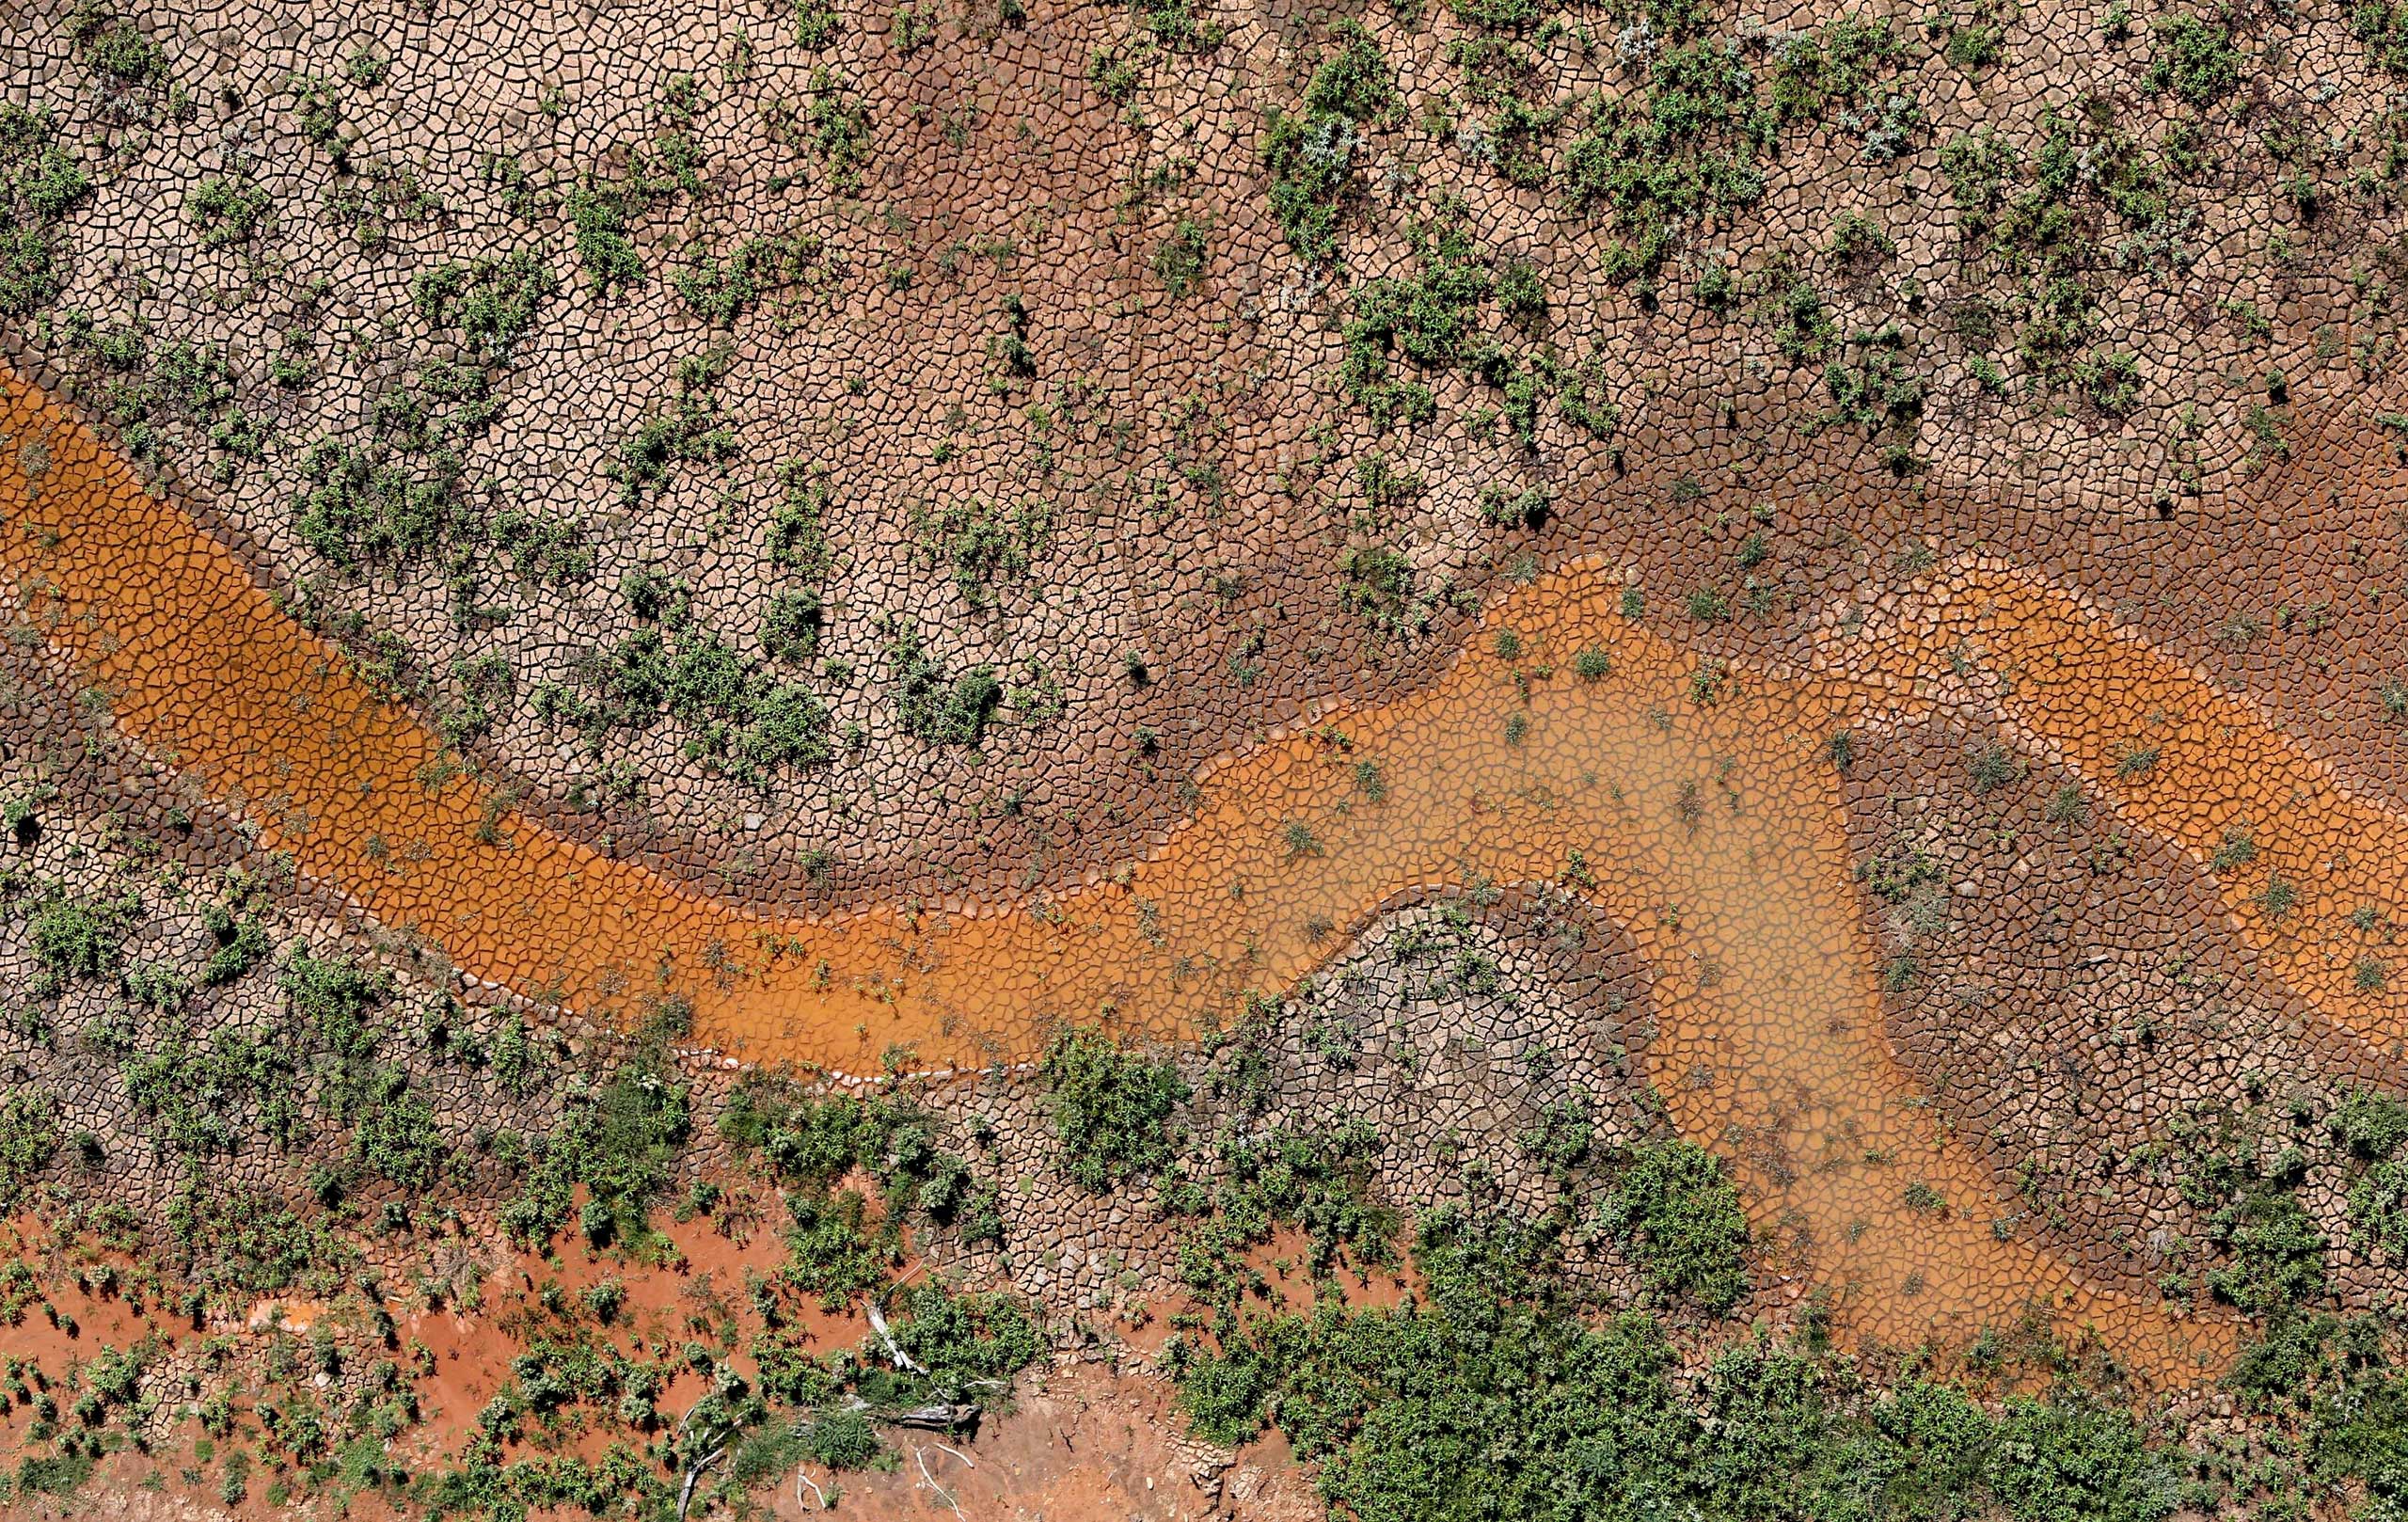 An aerial view of the cracked ground of the Atibainha dam, part of the Cantareira reservoir, is seen during a drought in Nazare Paulista, Sao Paulo state, Feb, 12, 2015.